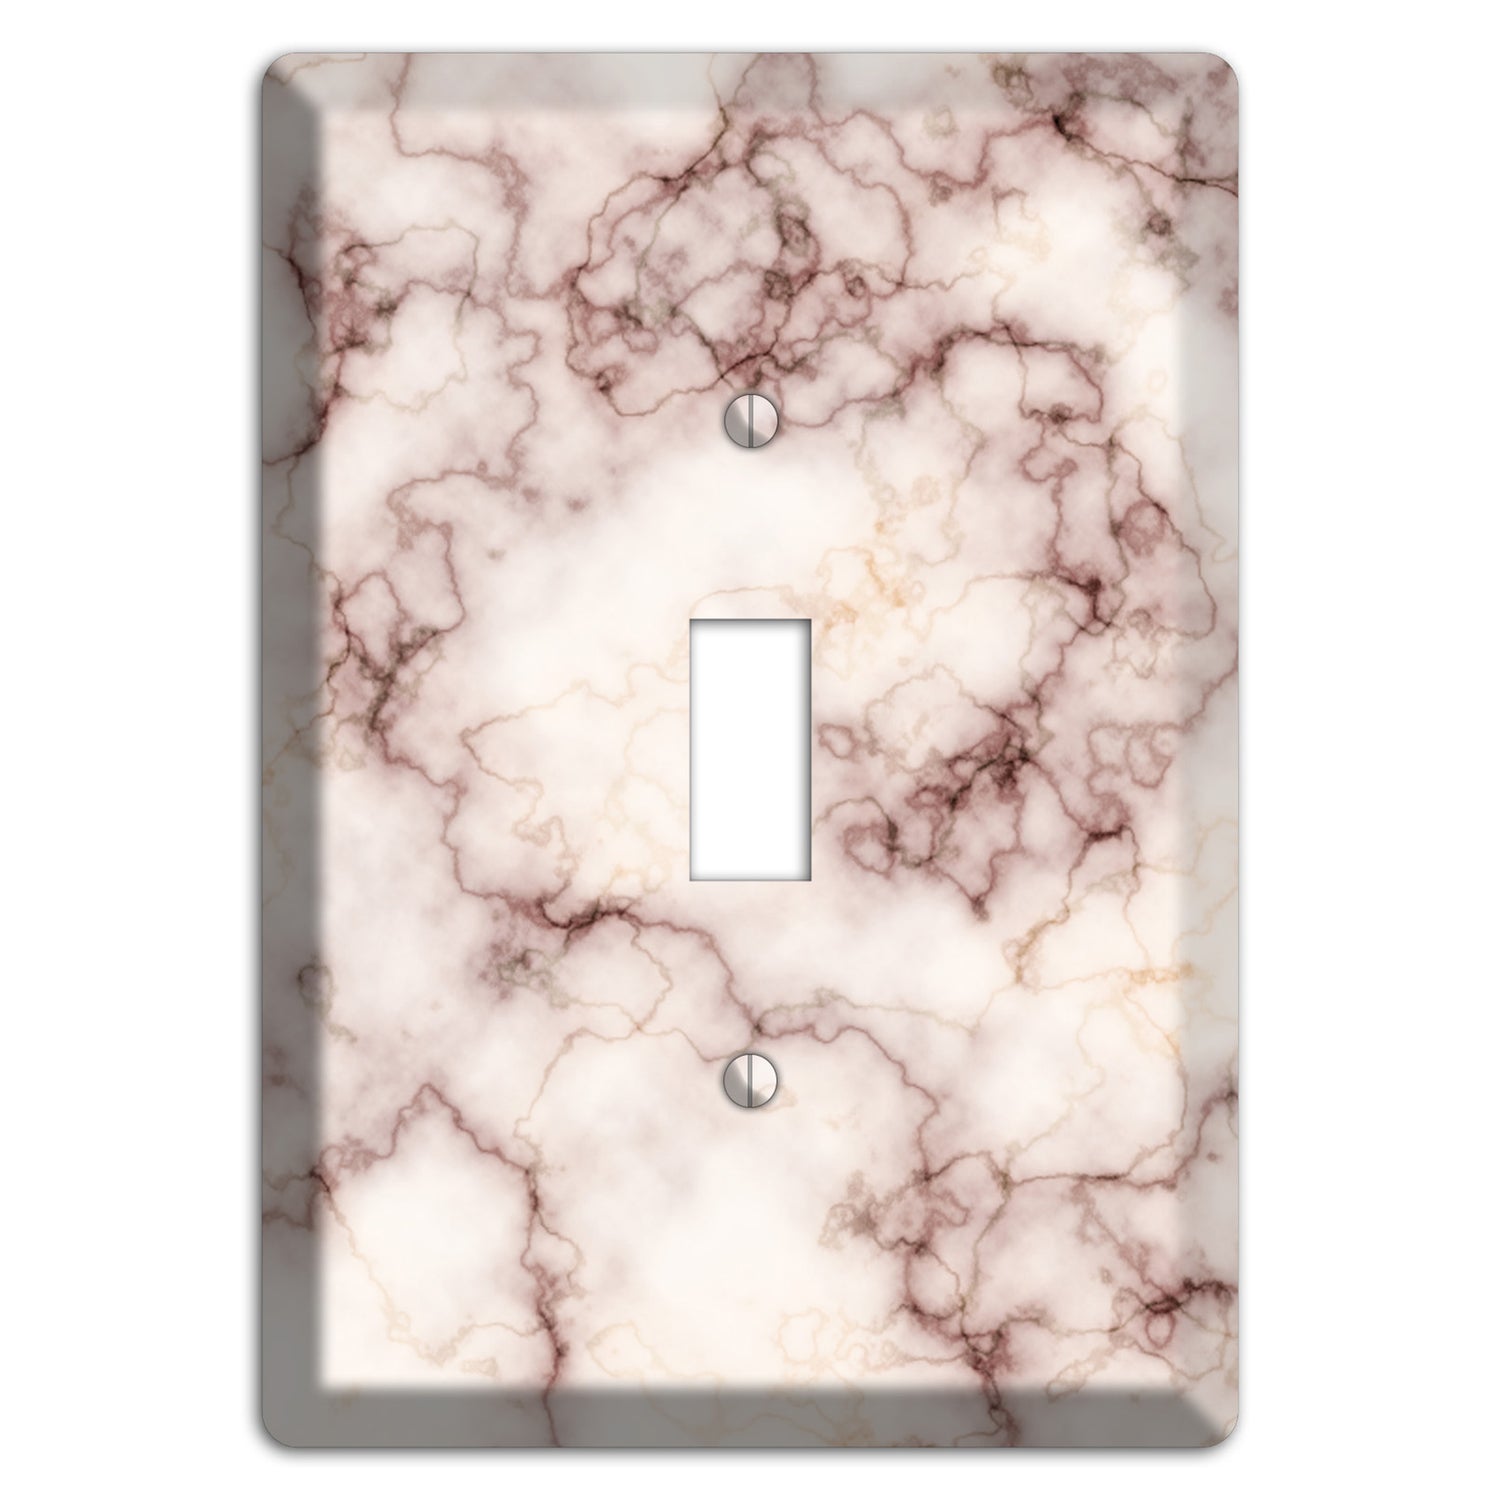 Burgundy Stained Marble Cover Plates